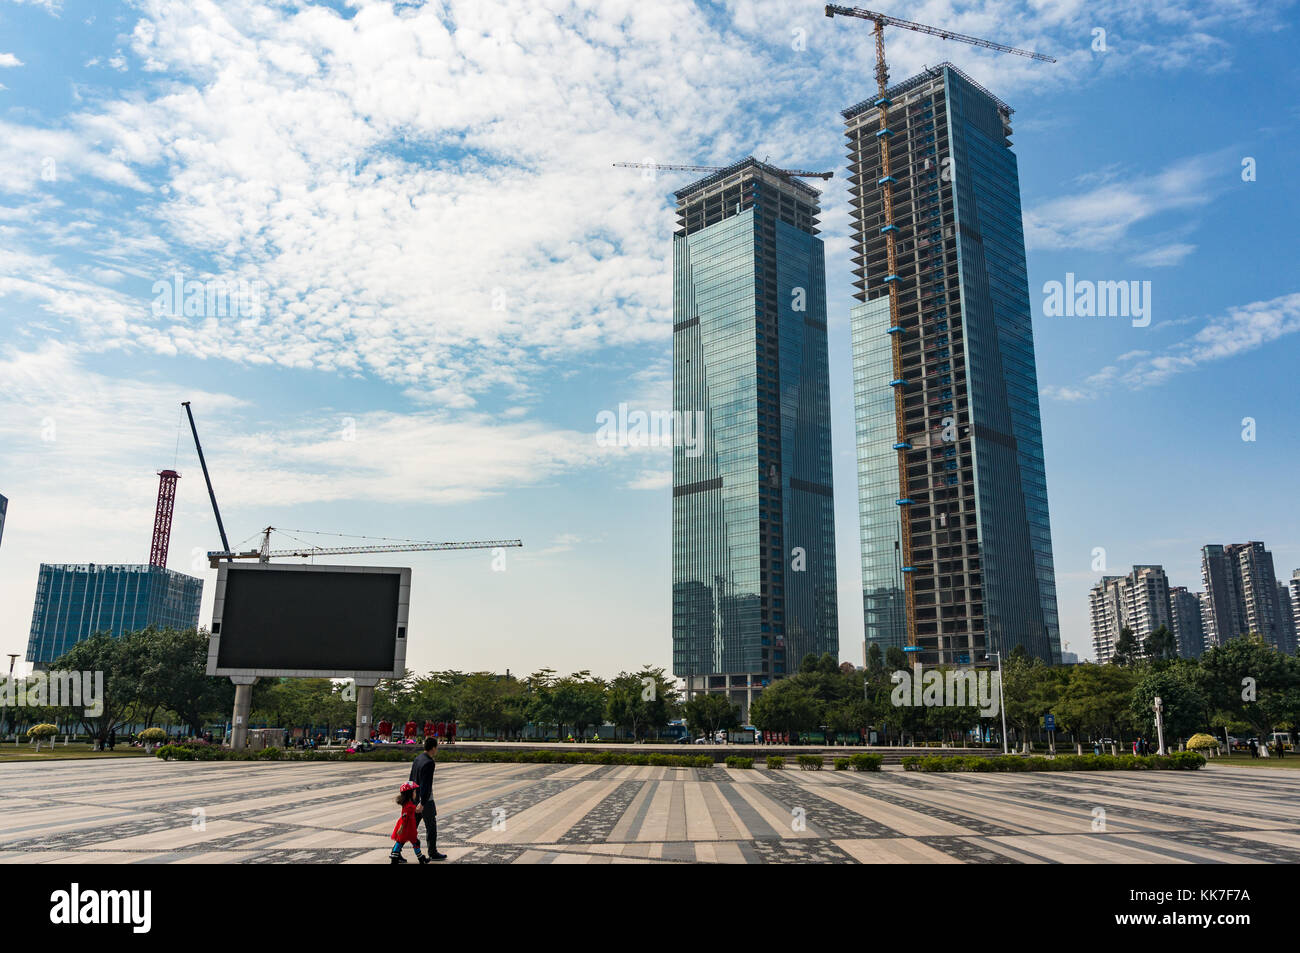 Father and daughter walking in vast city square as unfinished skyscrapers buildings loom in the distance in Shenzhen, Guangdong Province, China Stock Photo